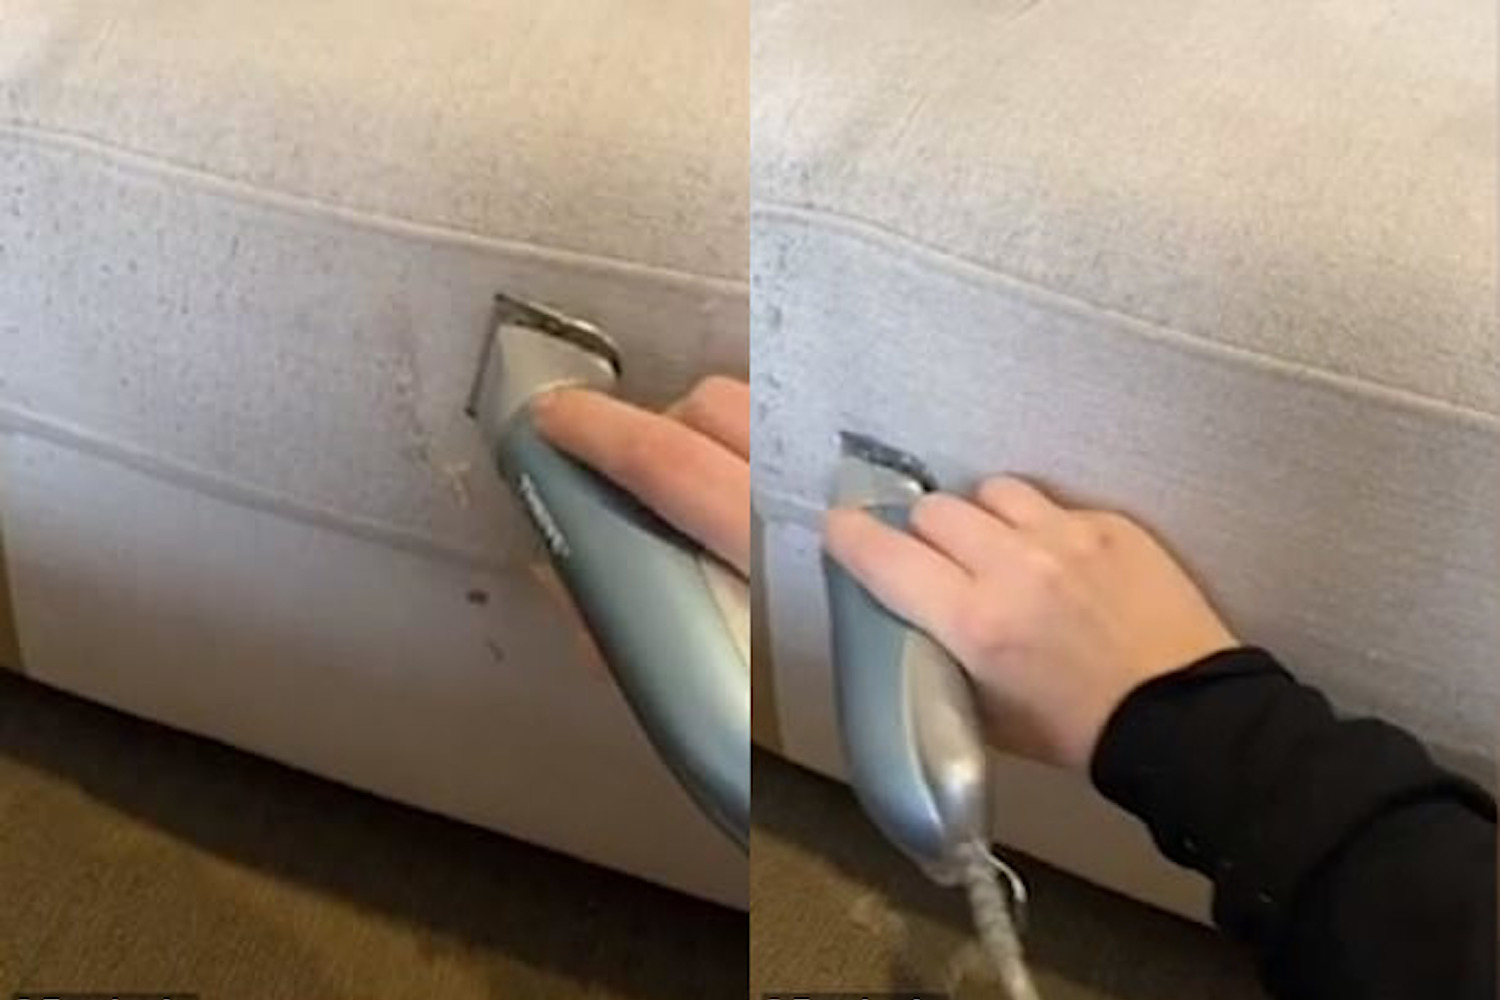 HOW TO FIX PULLS OR SNAGS IN YOUR FURNITURE UPHOLSTERY FABRIC